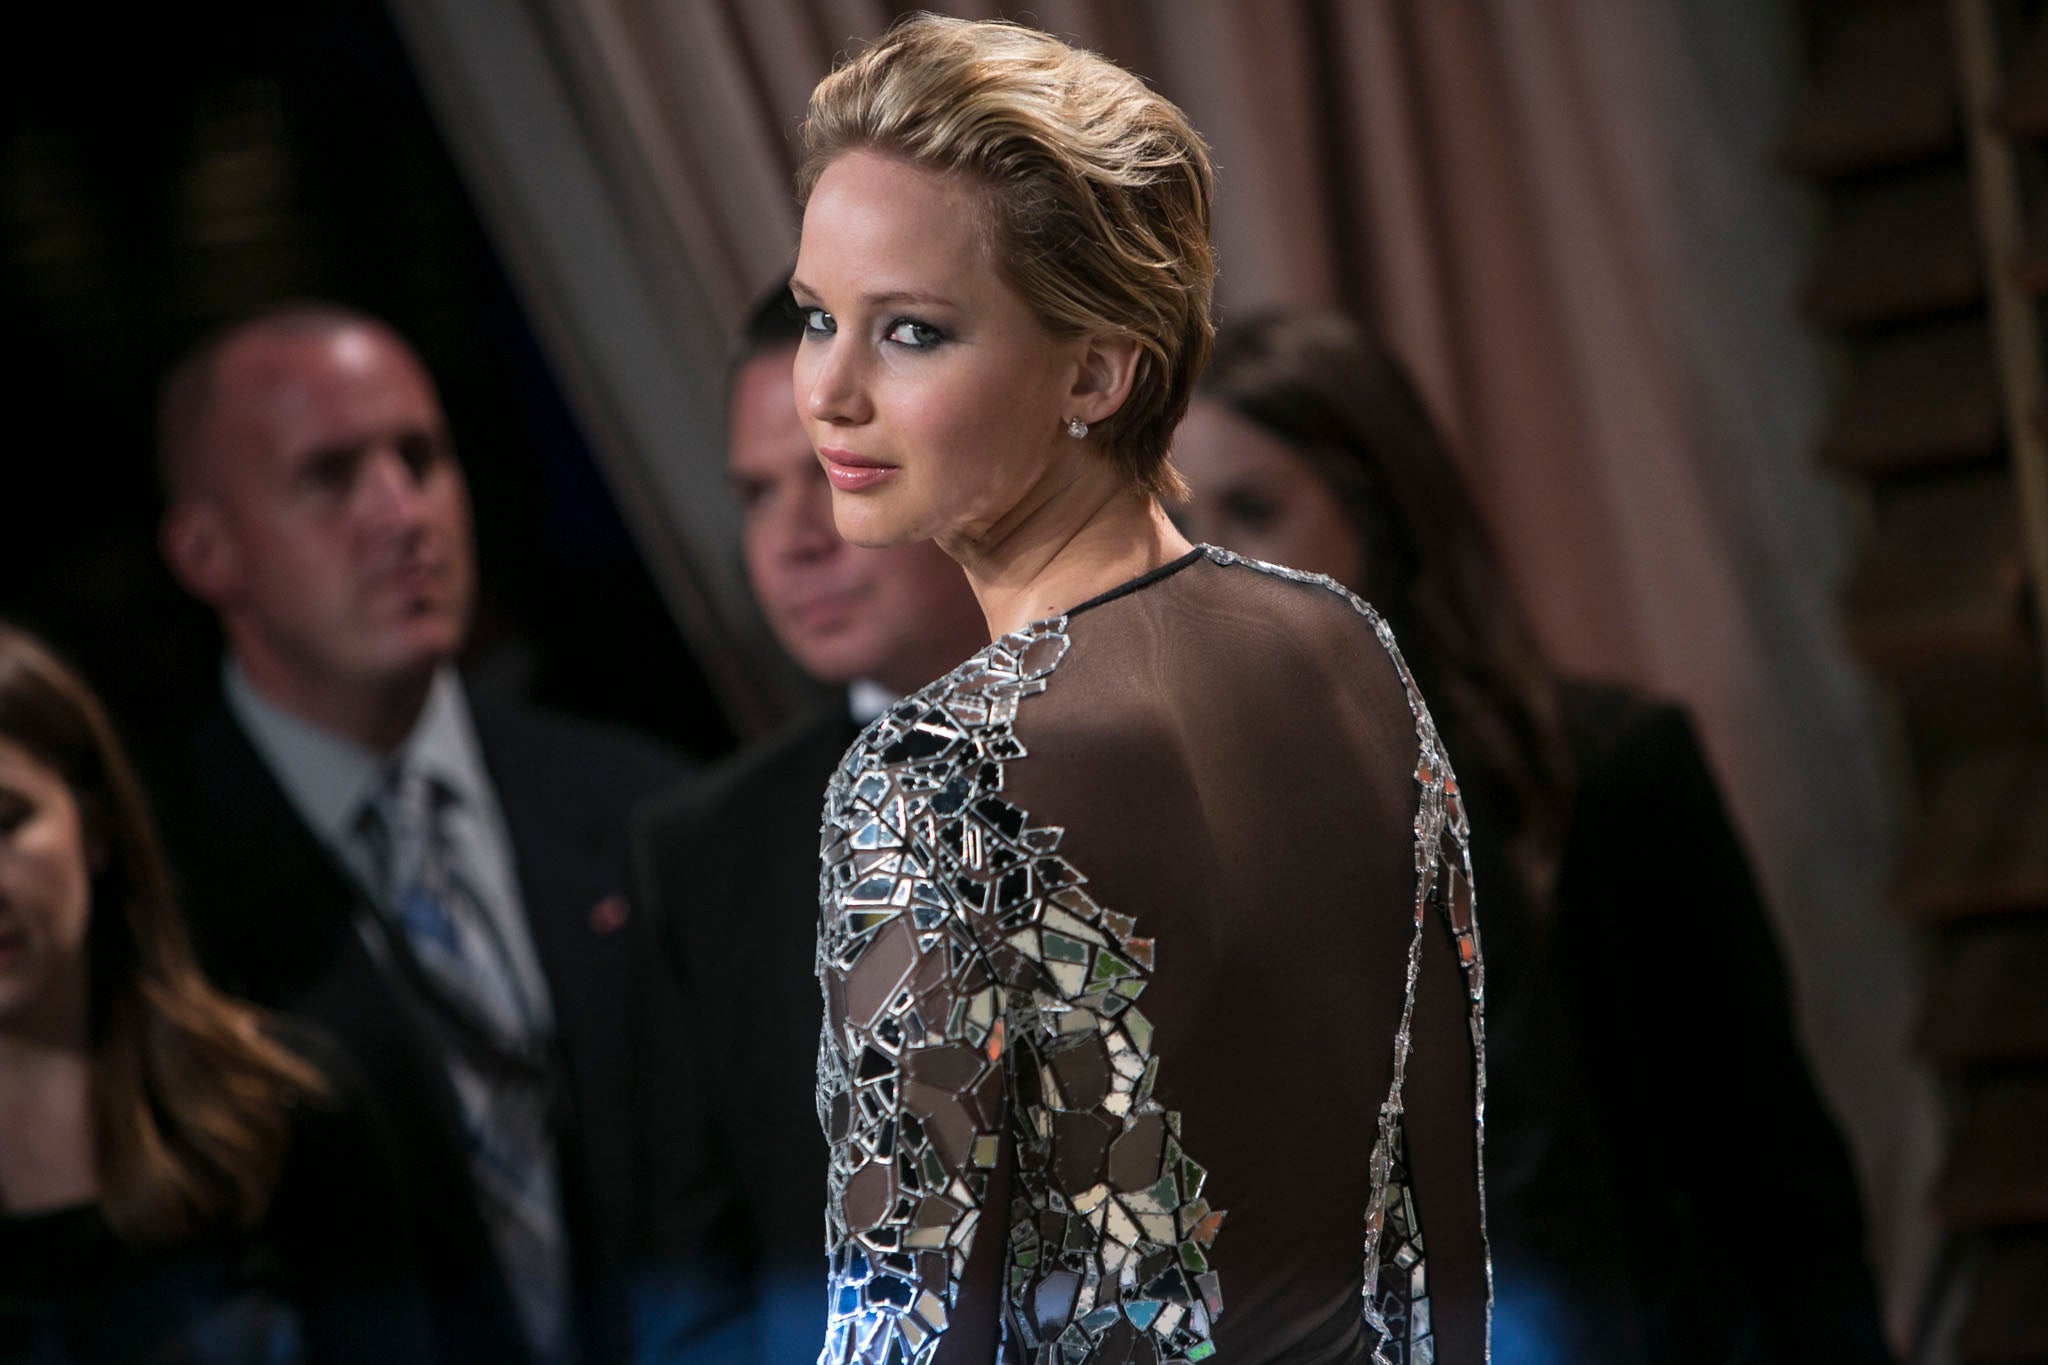 Jennifer Lawrence at the Vanity Fair Academy Awards party in February 2014